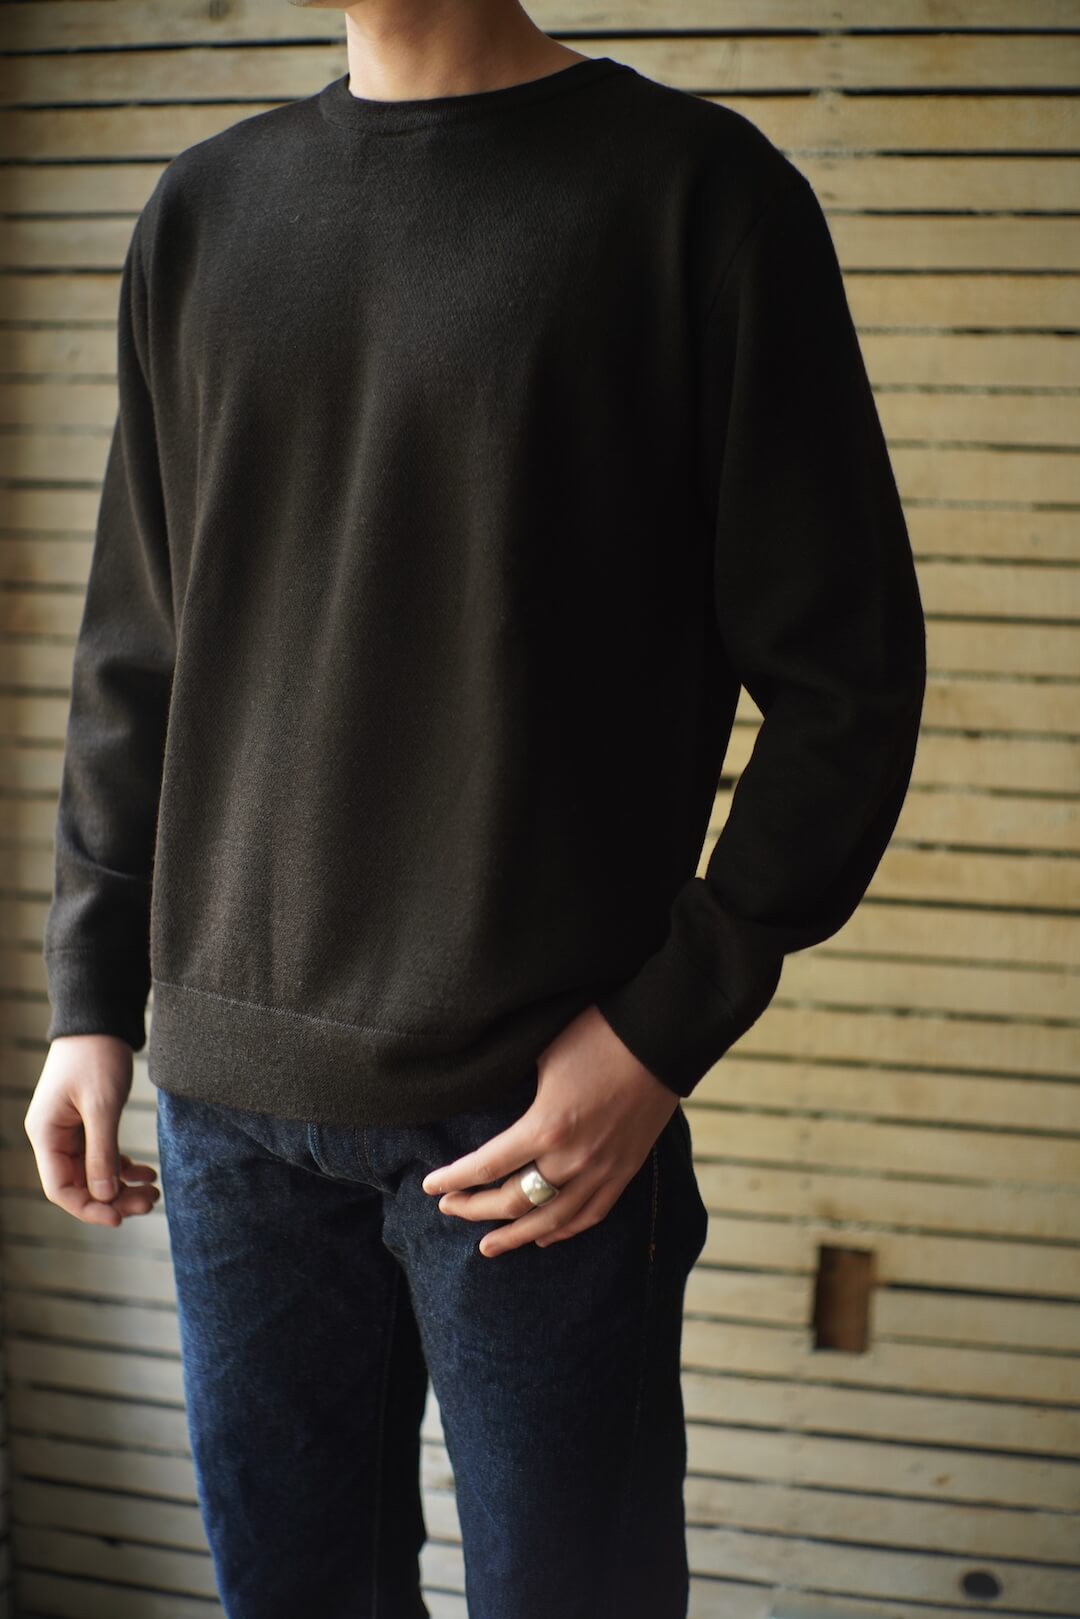 Pure Black Crew Neck - The Inoue Brothers - ARCH ONLINE SHOP